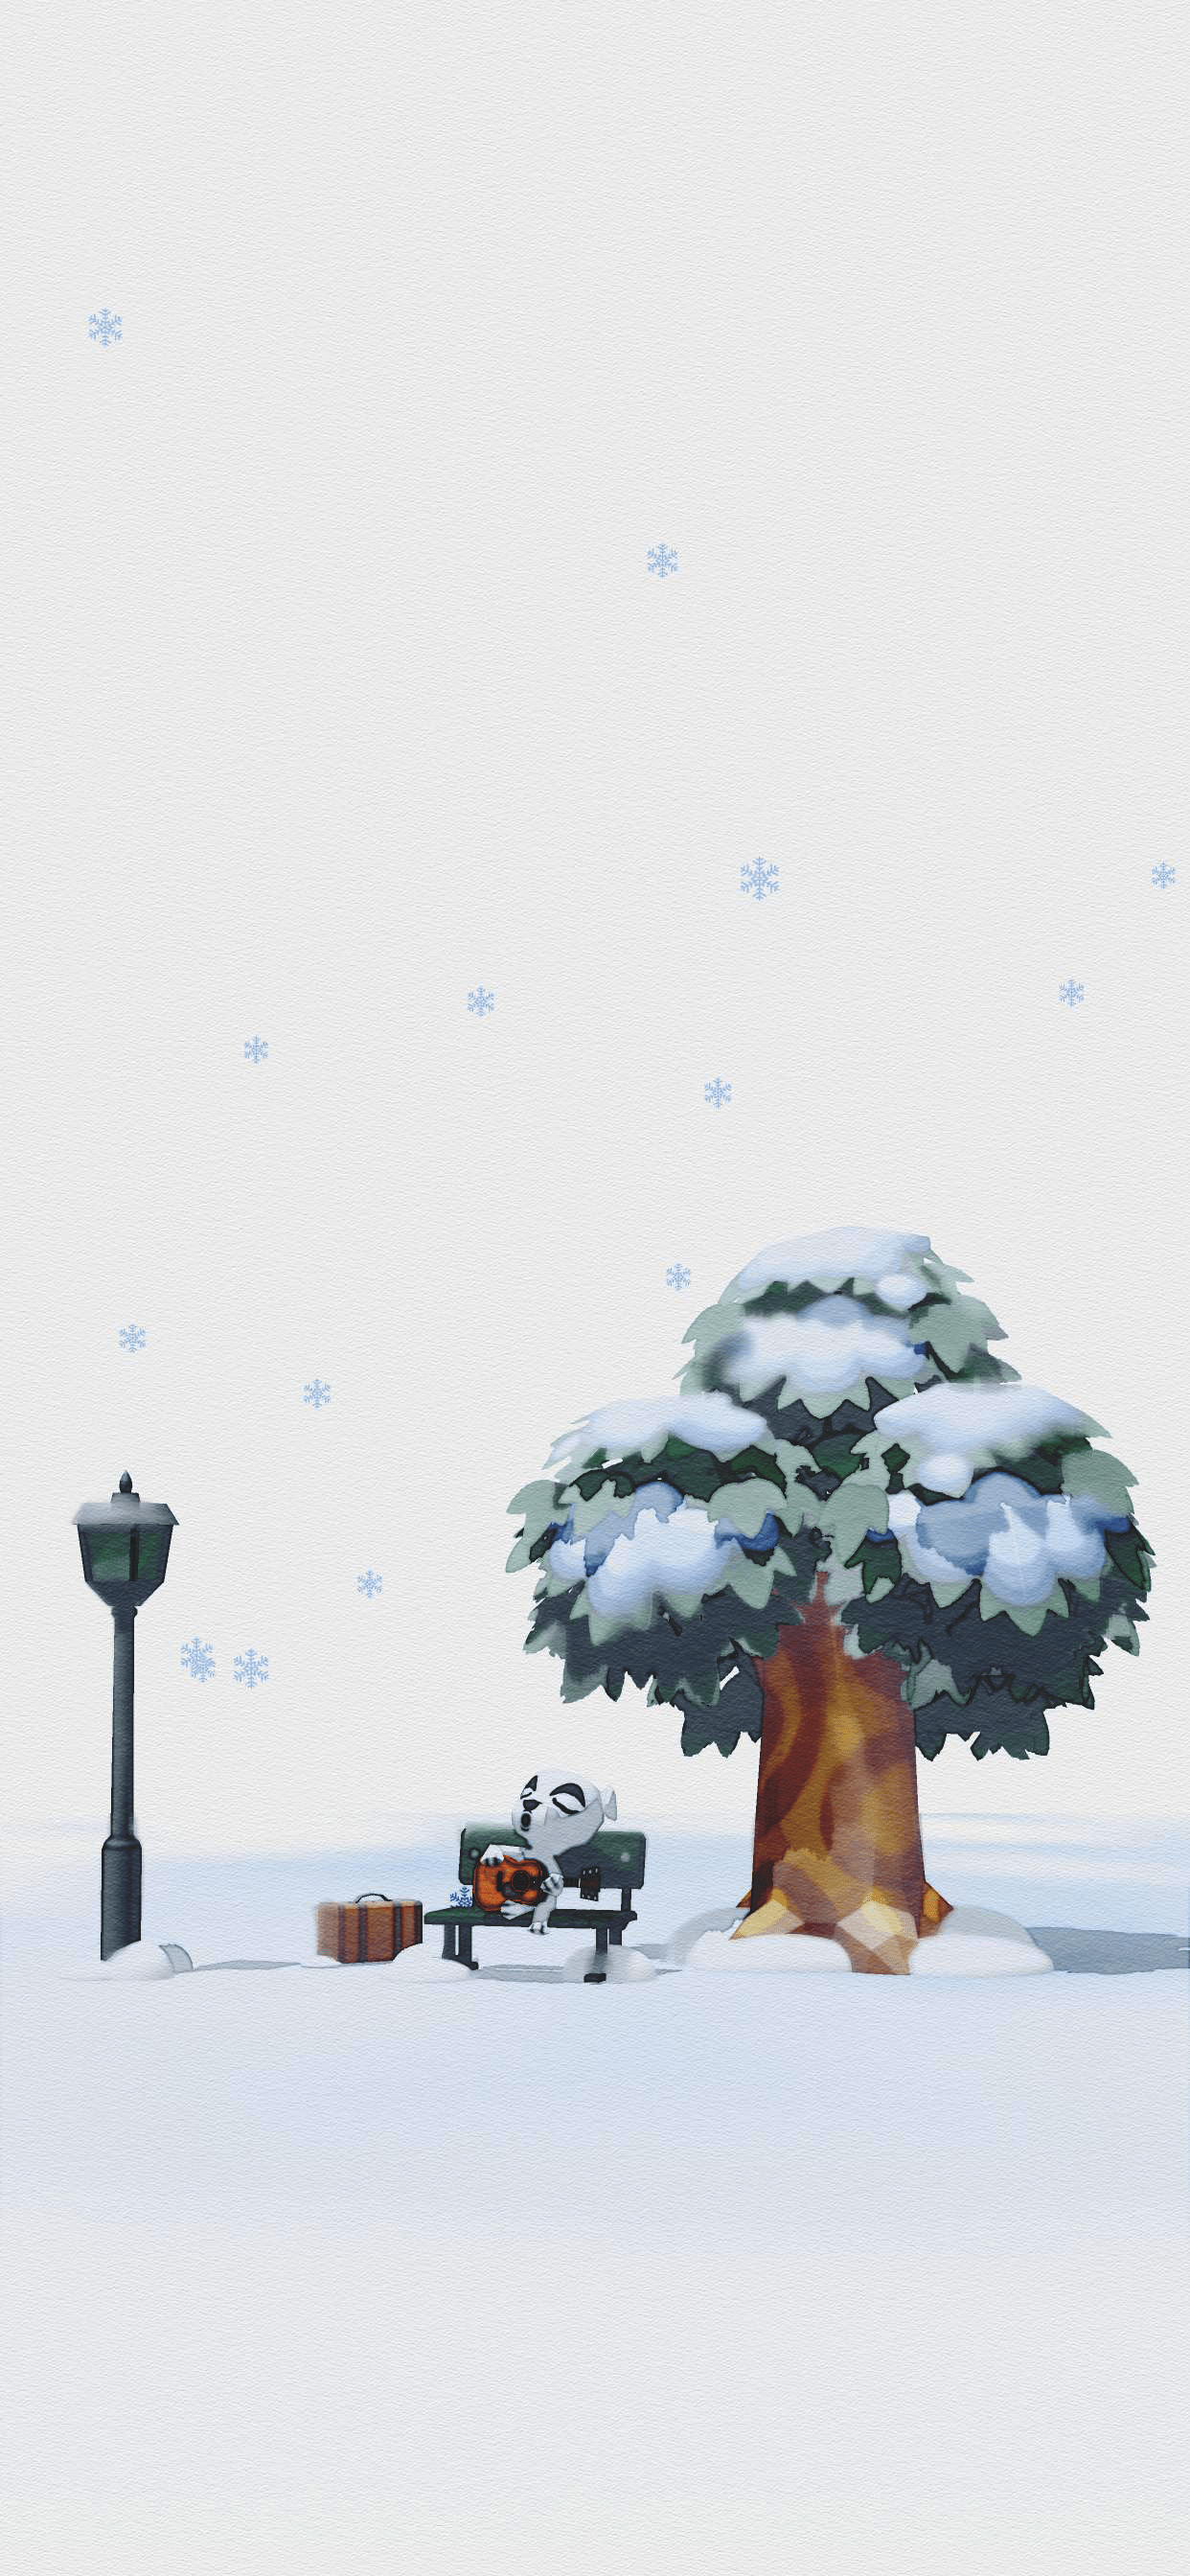 A snowy scene with trees and trucks - Animal Crossing